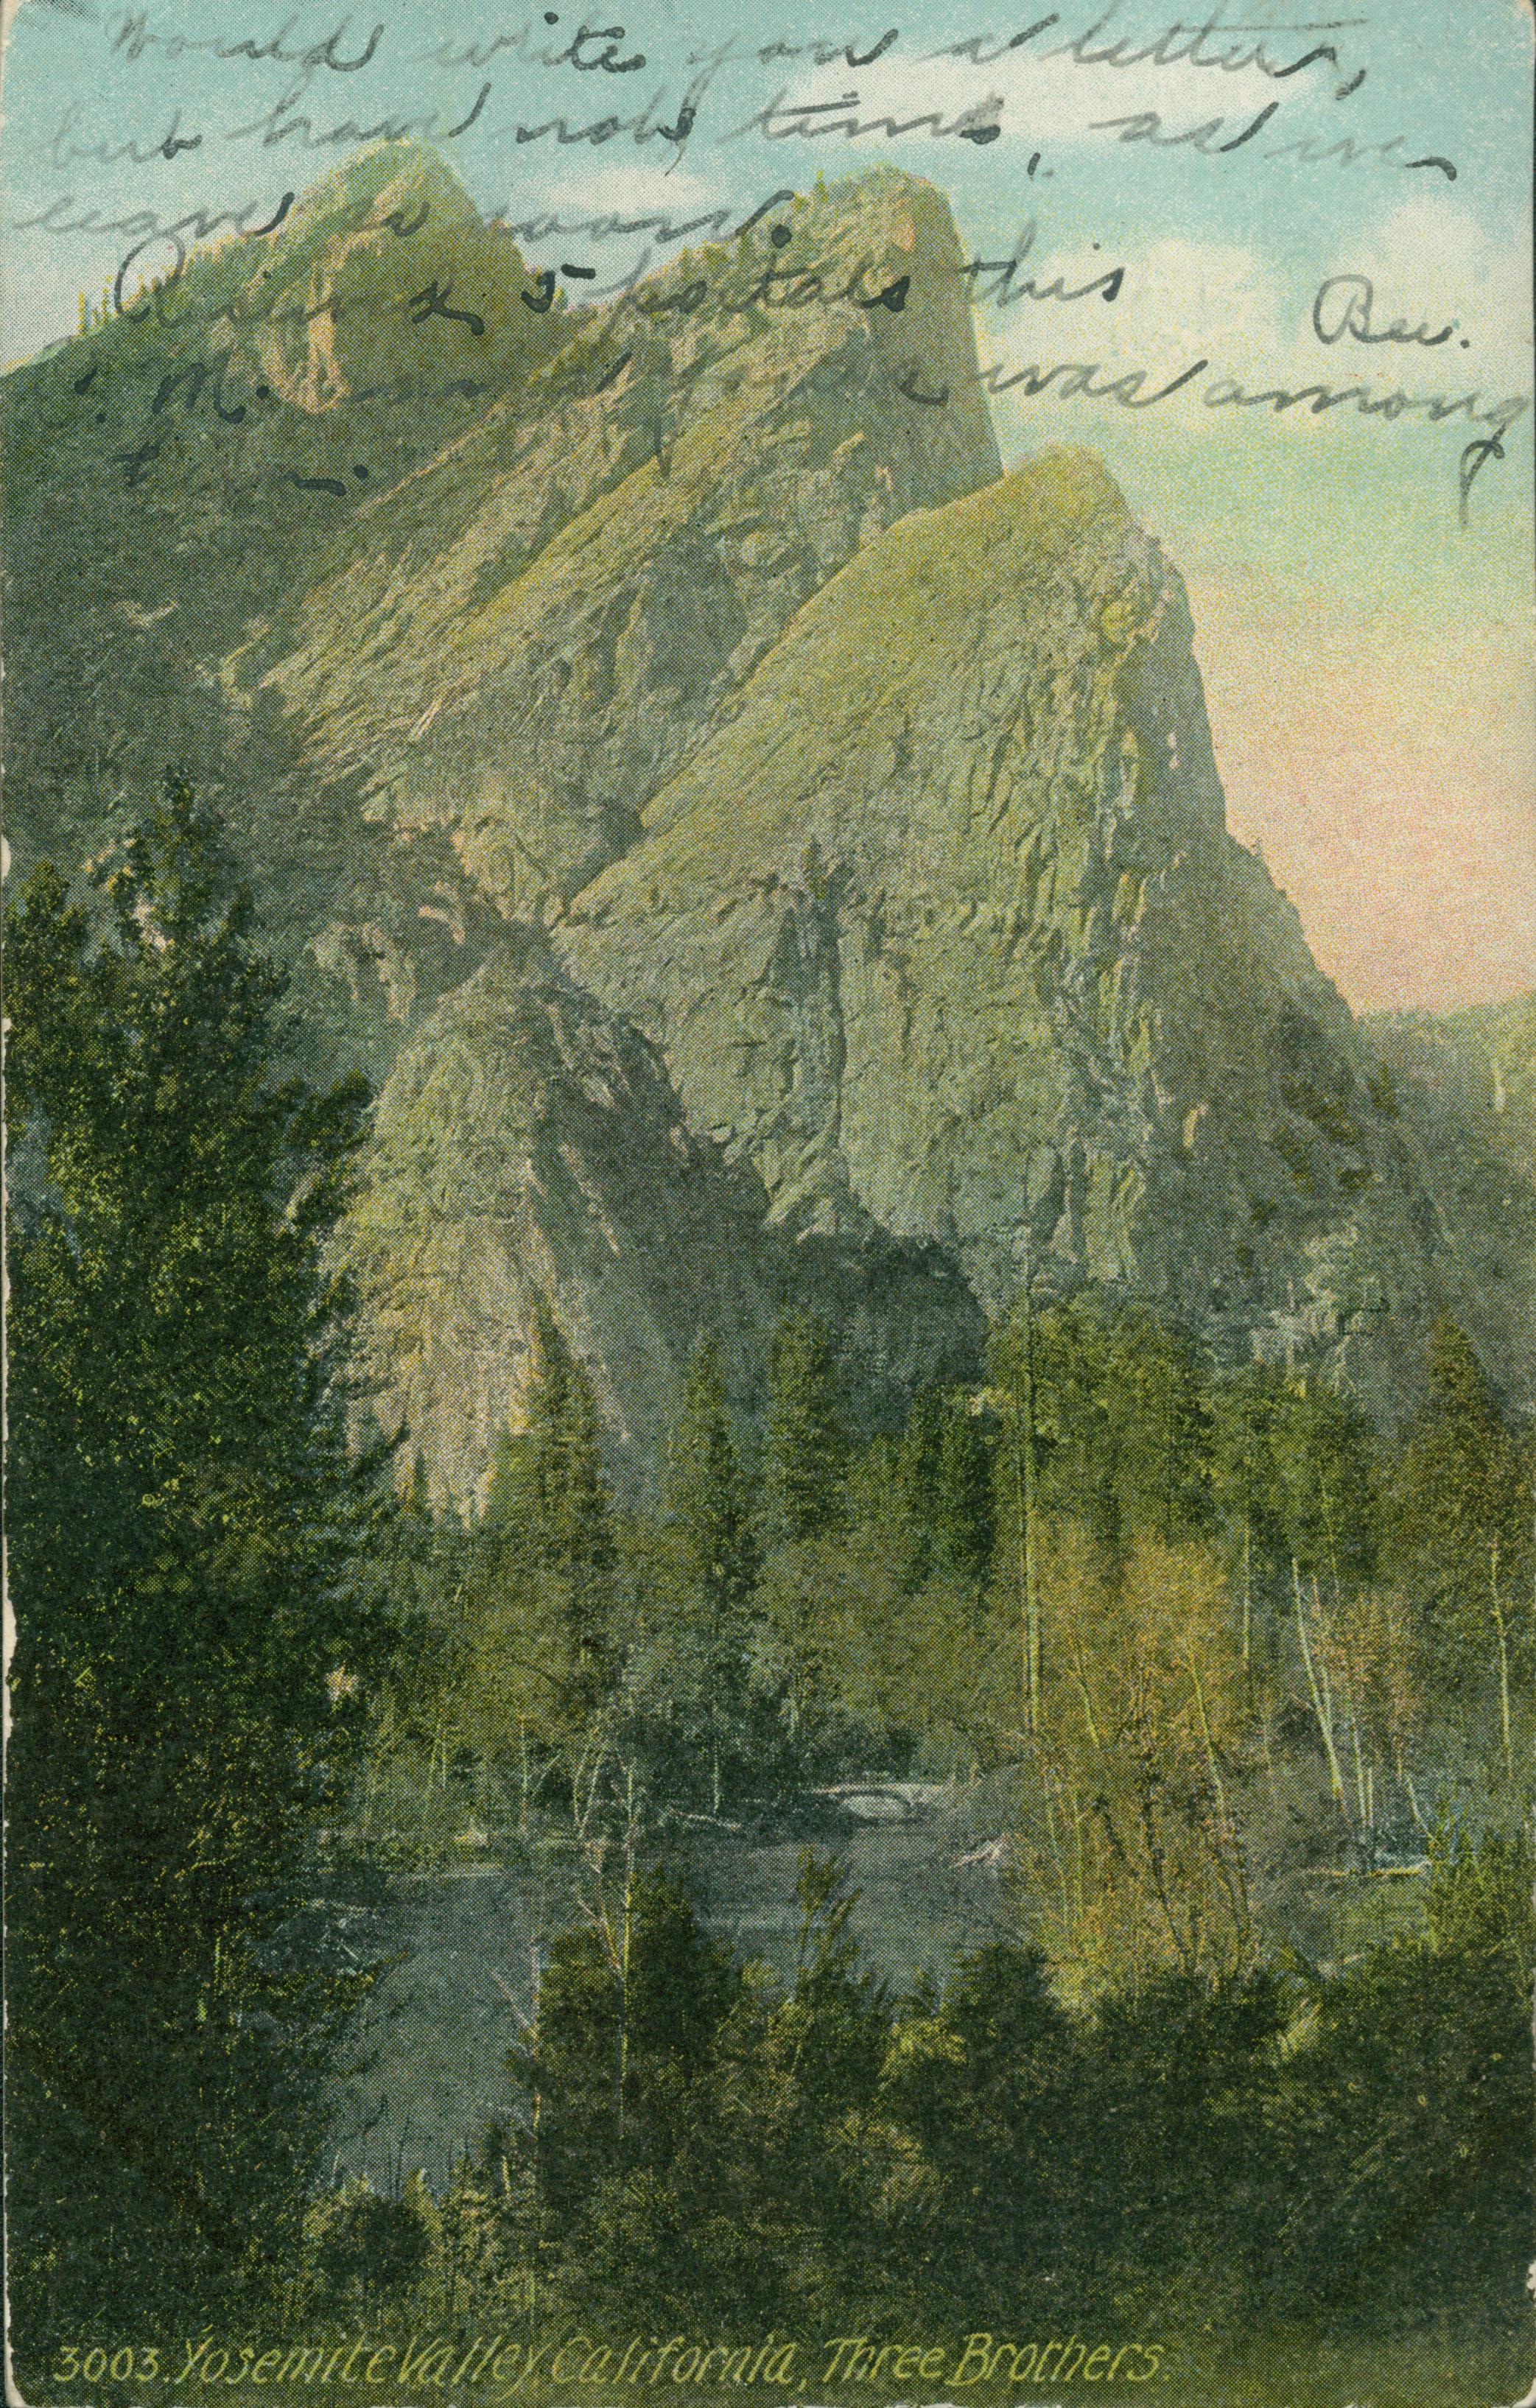 Shows the Three Brothers rock formation with trees and a river in the foreground.